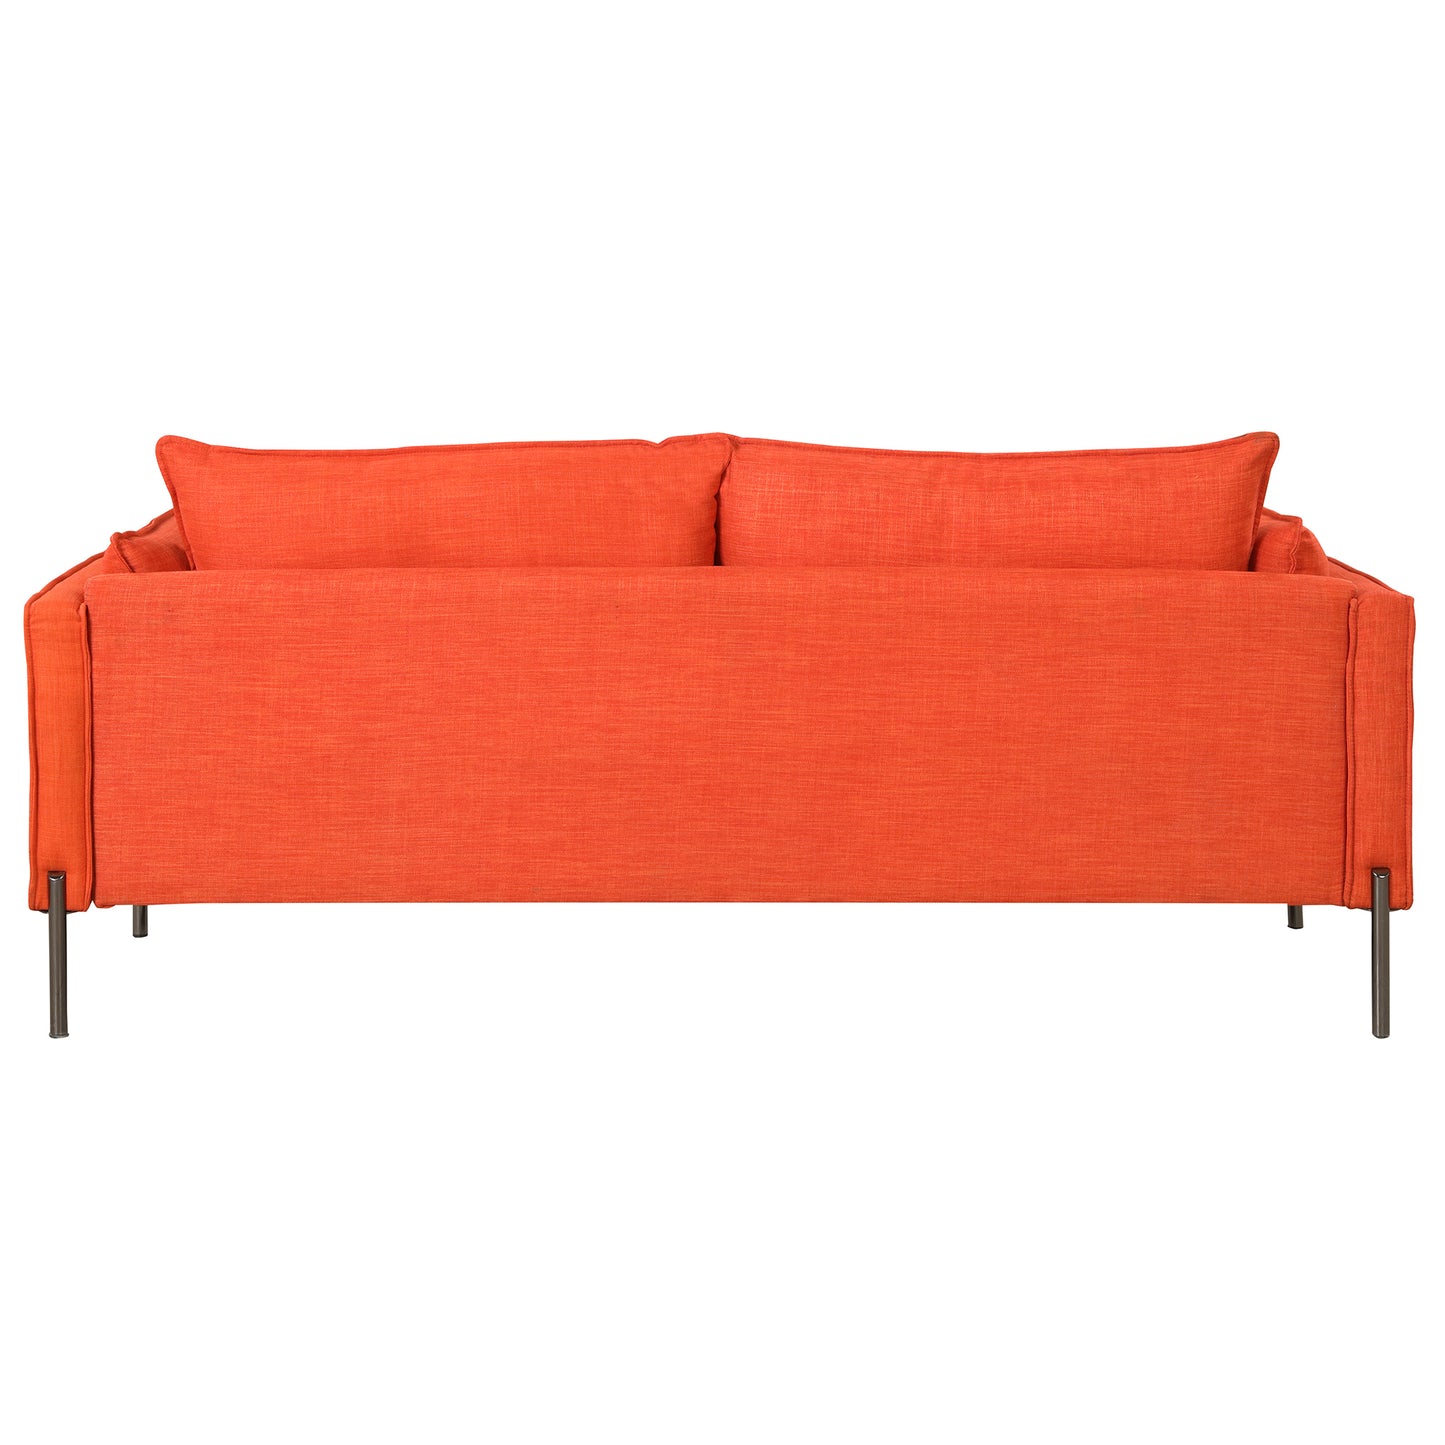 76.2" Modern Style 3 Seat Sofa  Linen Fabric Upholstered Couch Furniture 3-Seats Couch for Different Spaces,Living Room,Apartment